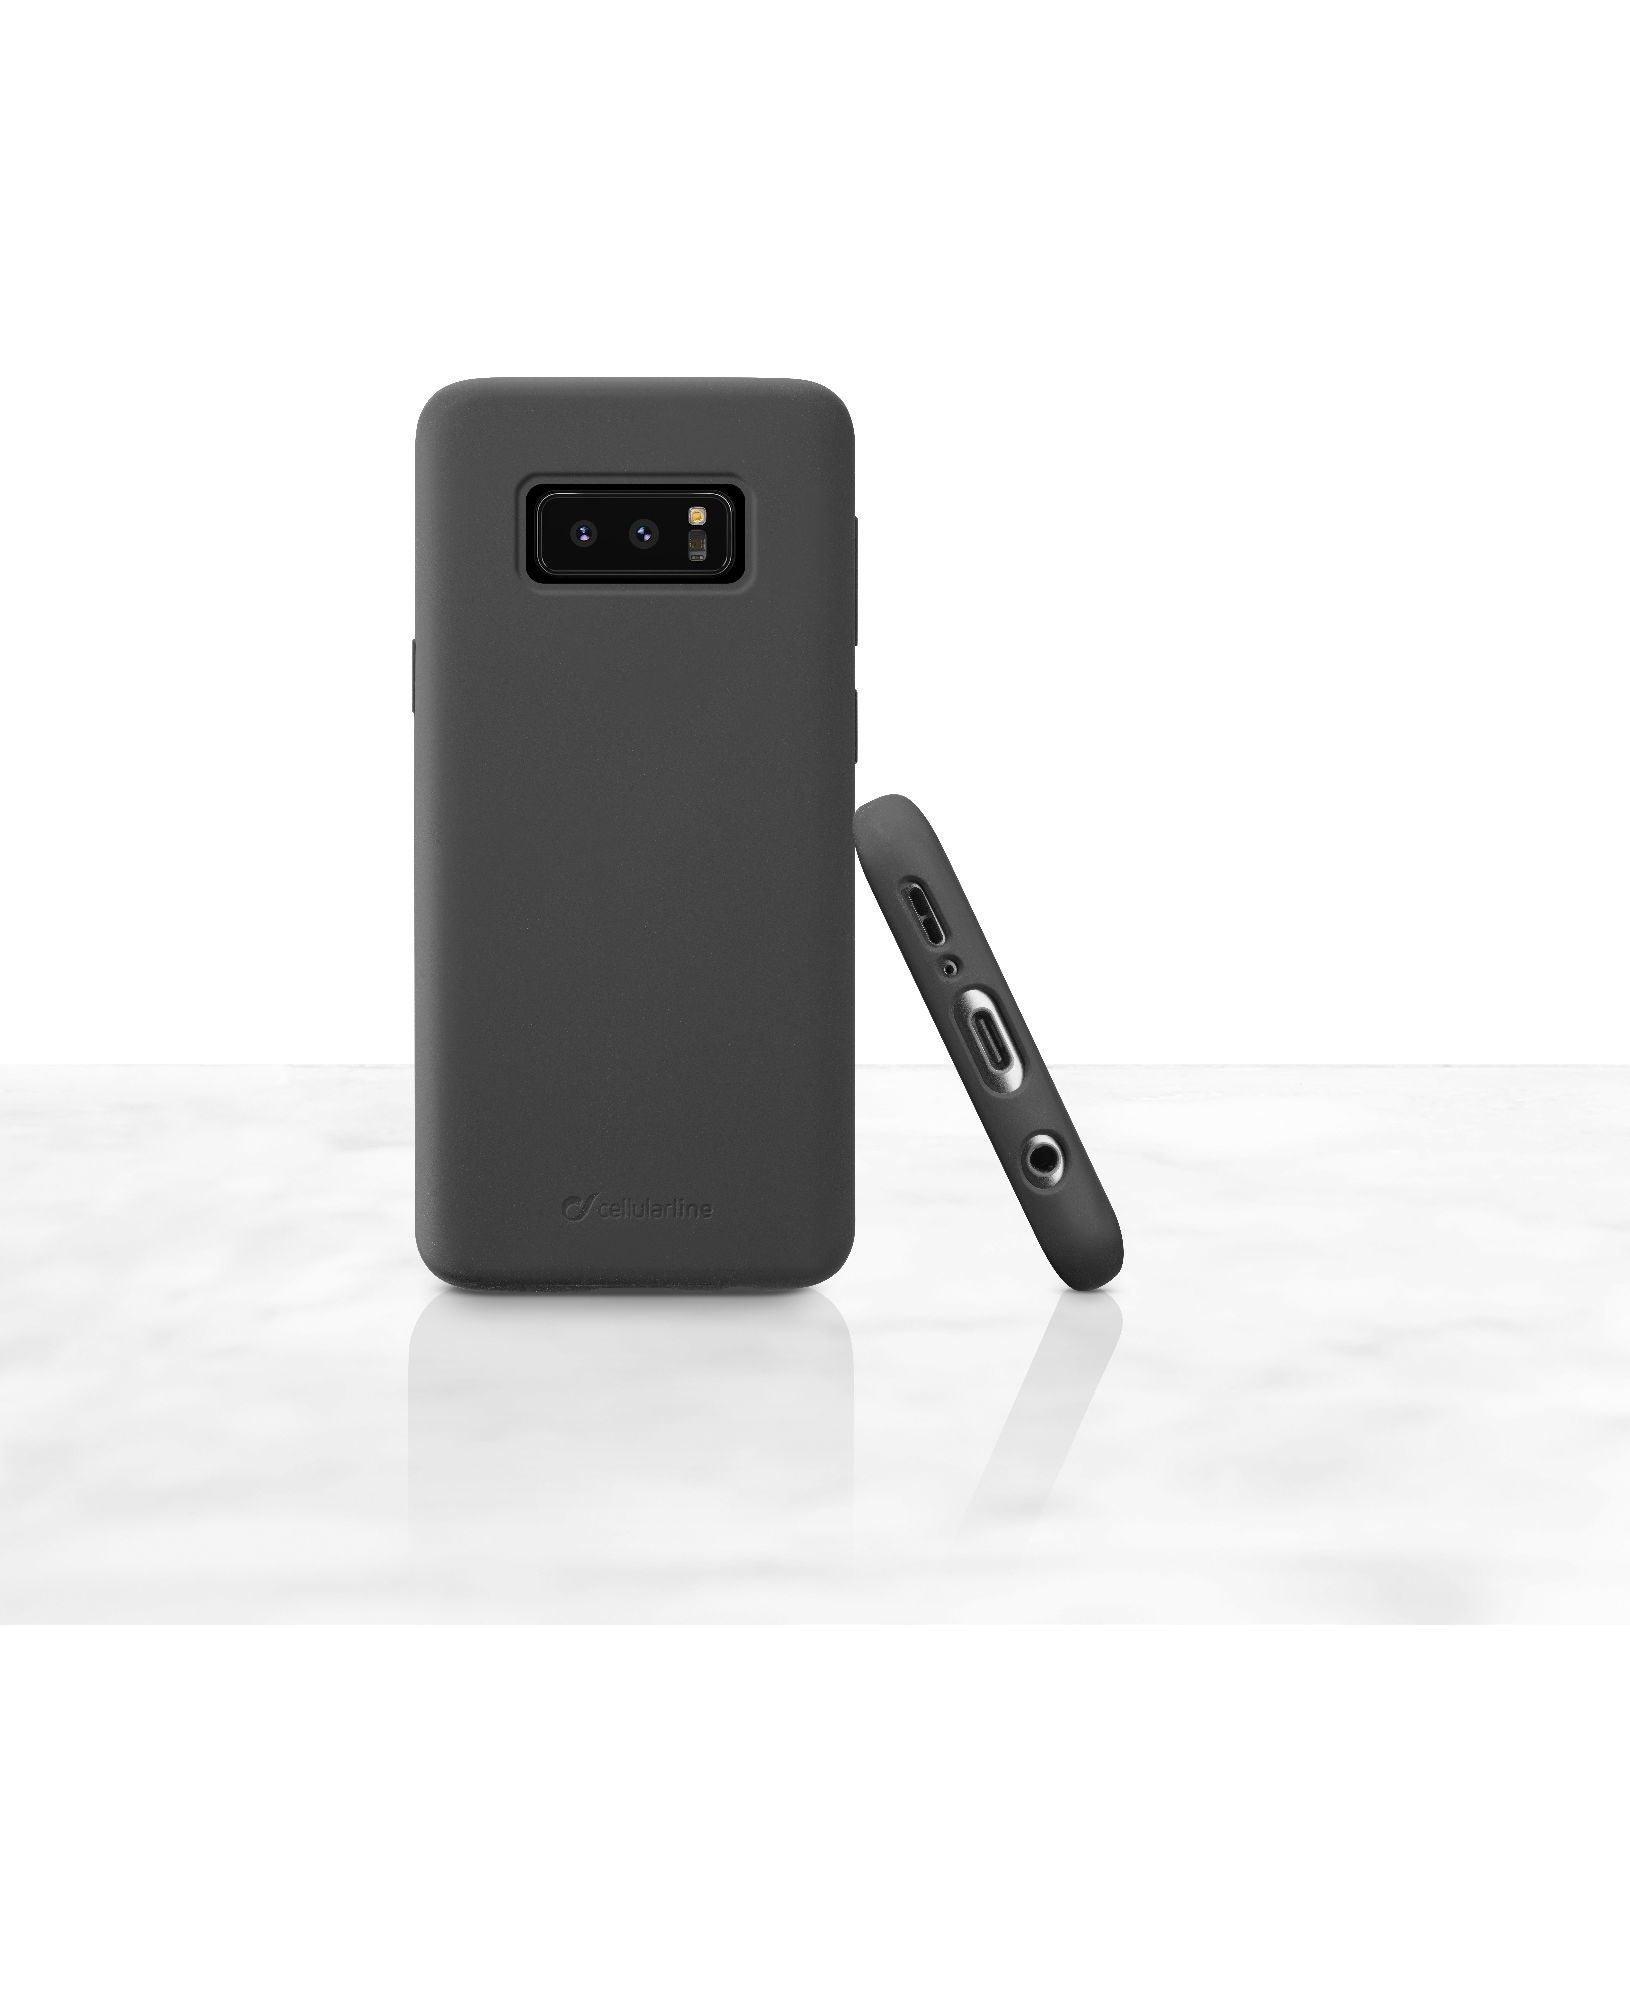 CellularLine Soft Touch Case Black for Galaxy S10e